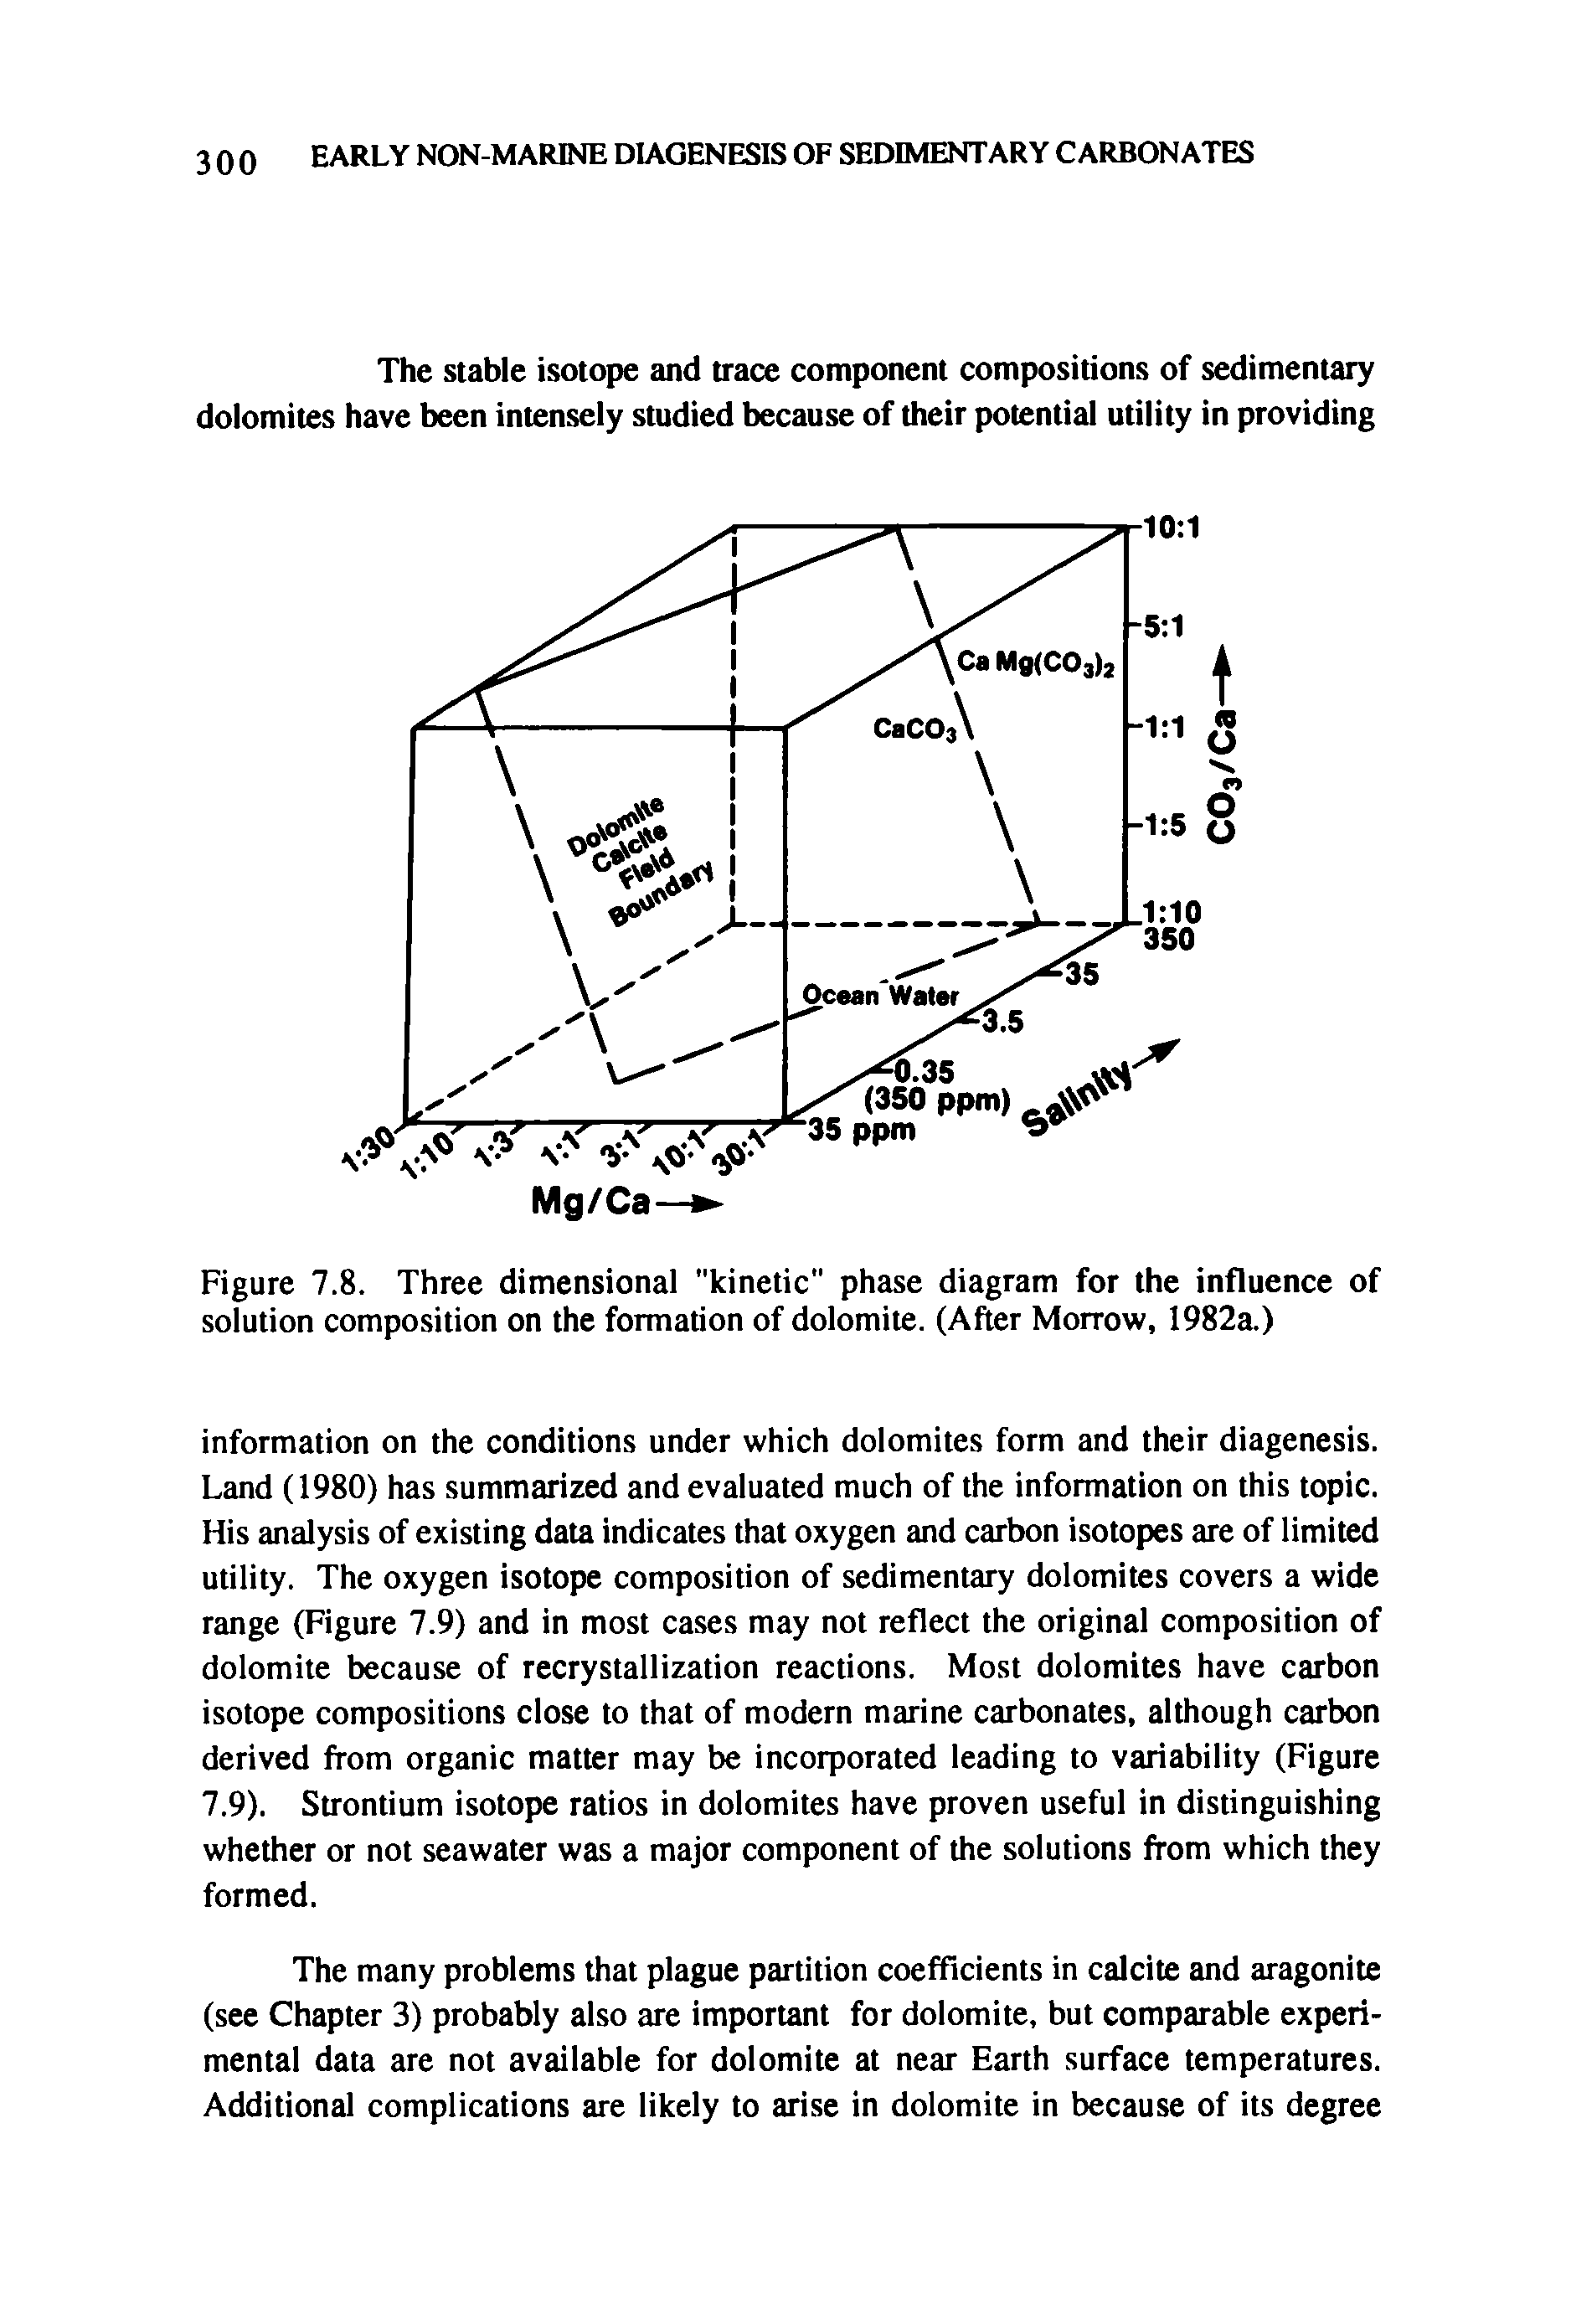 Figure 7.8. Three dimensional "kinetic" phase diagram for the influence of solution composition on the formation of dolomite. (After Morrow, 1982a.)...